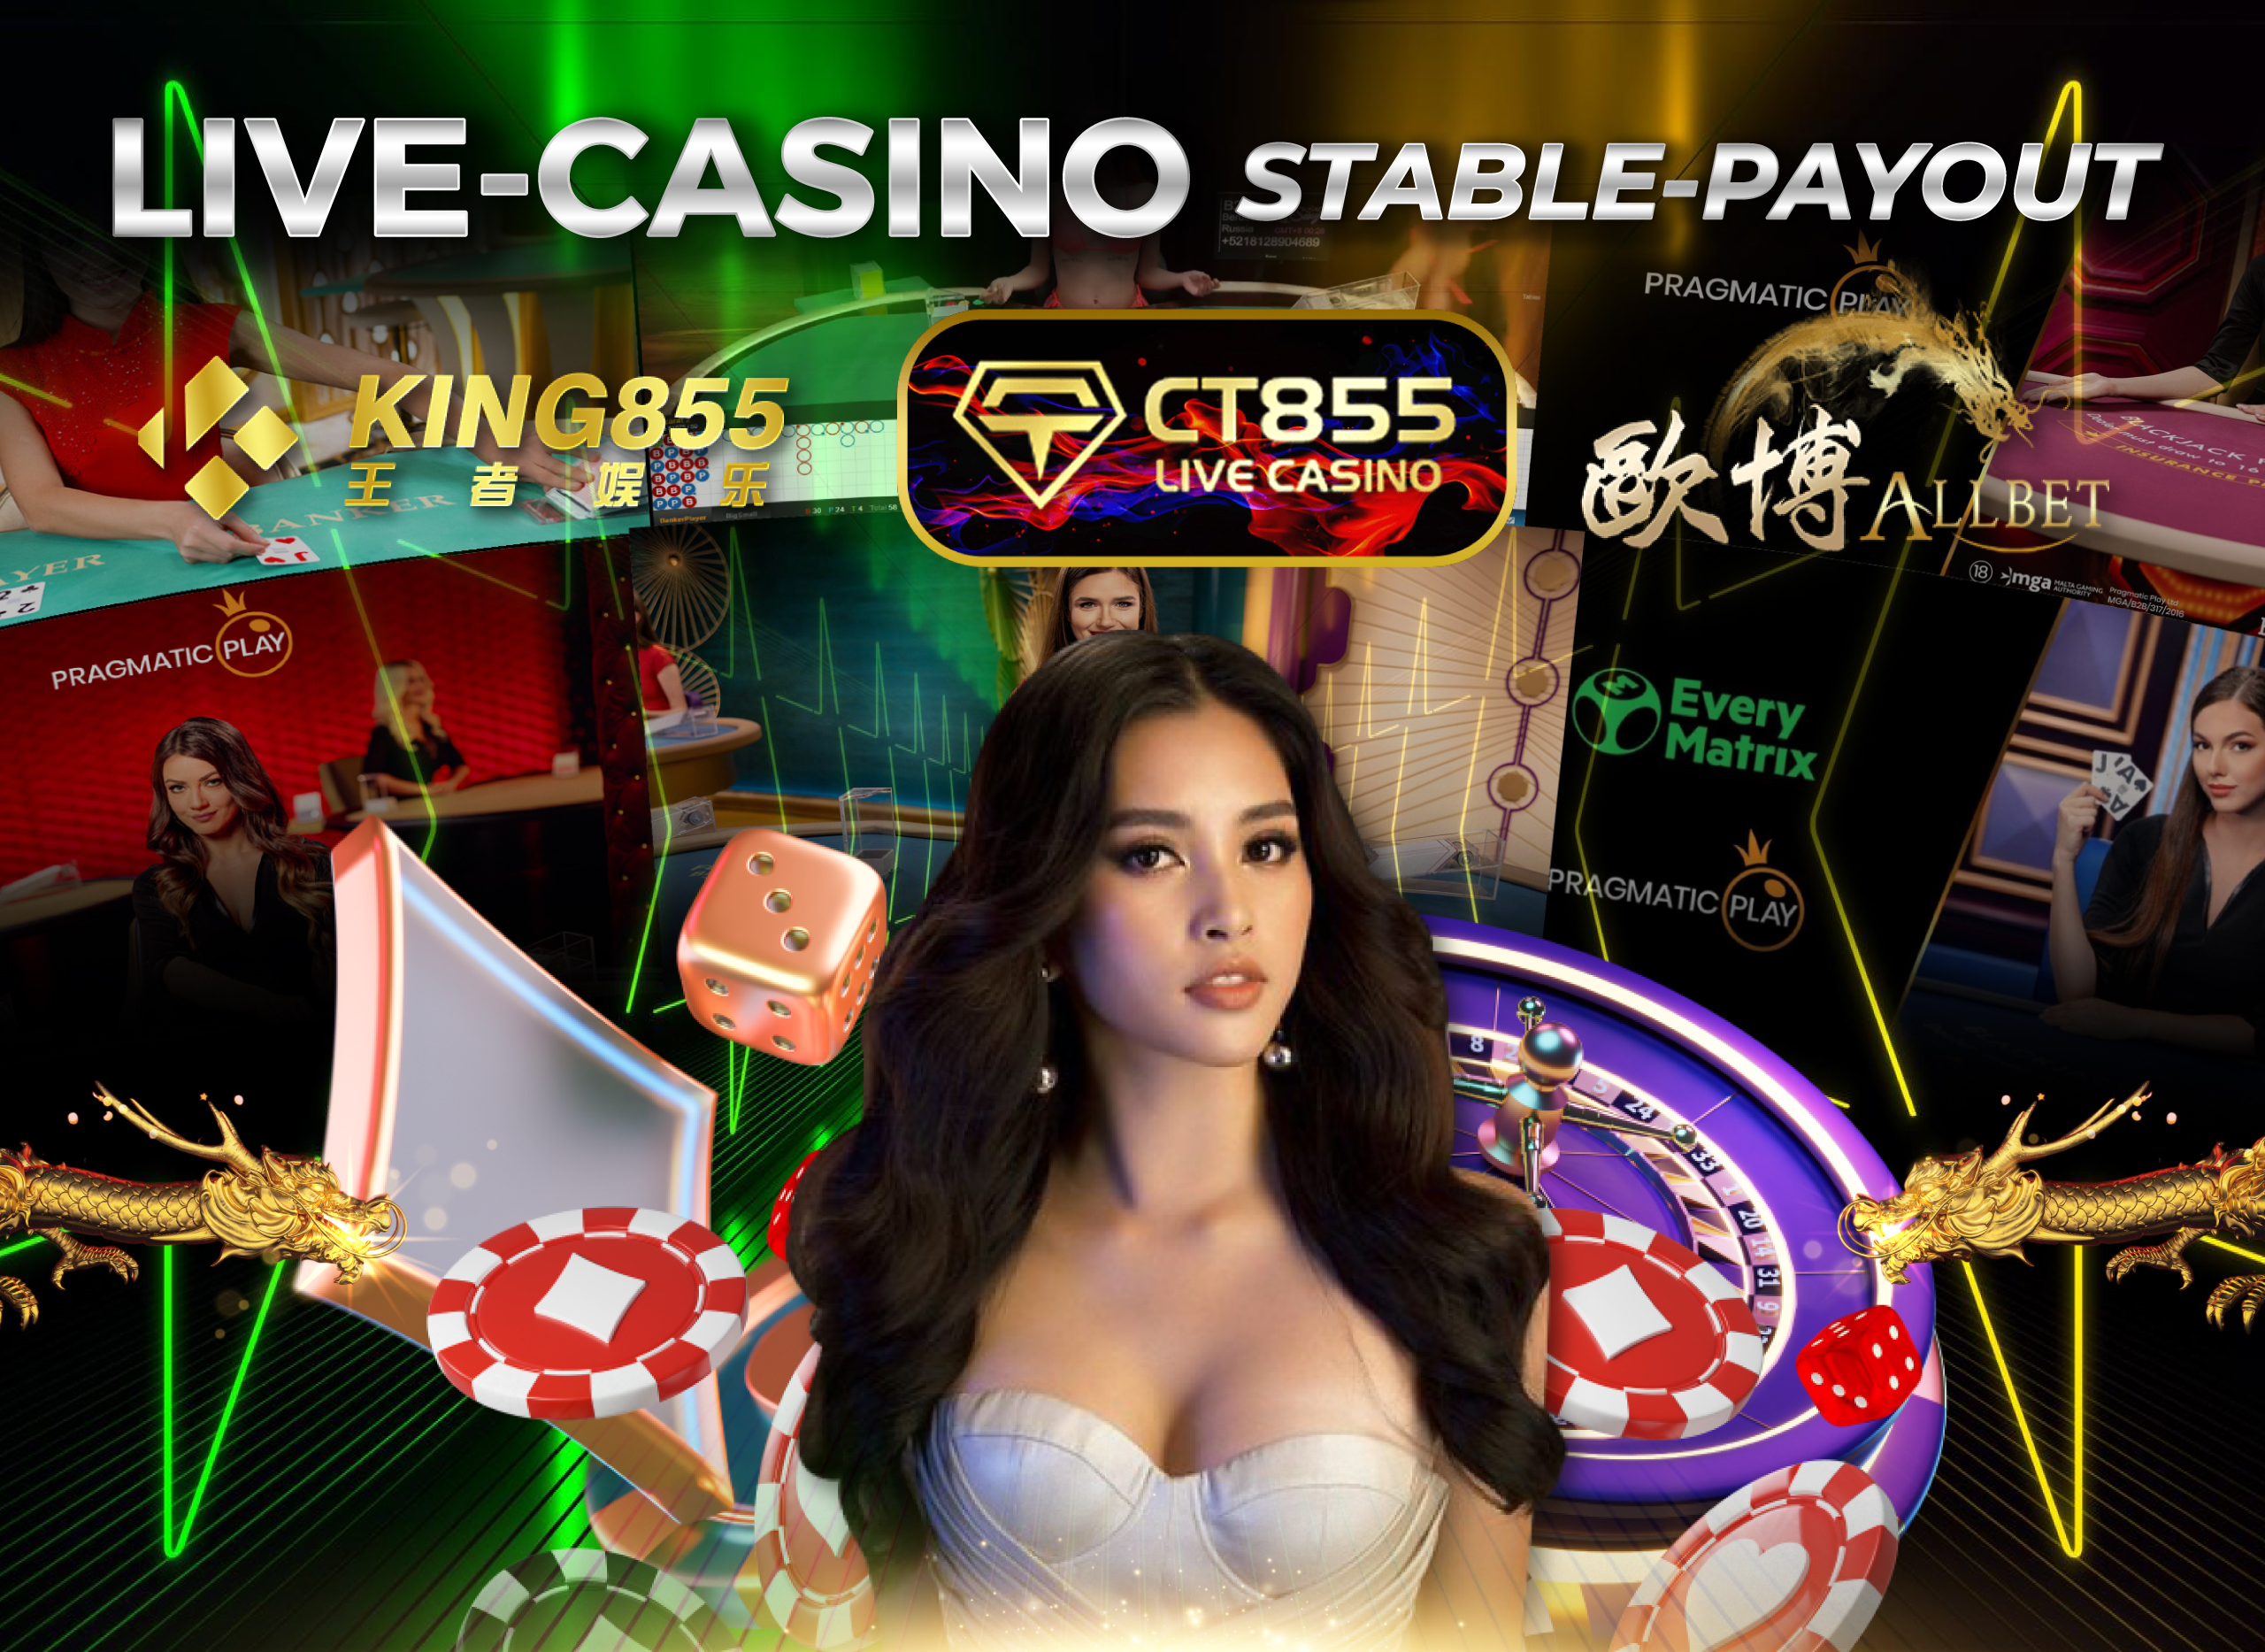 Live-Casino Stable-Payout